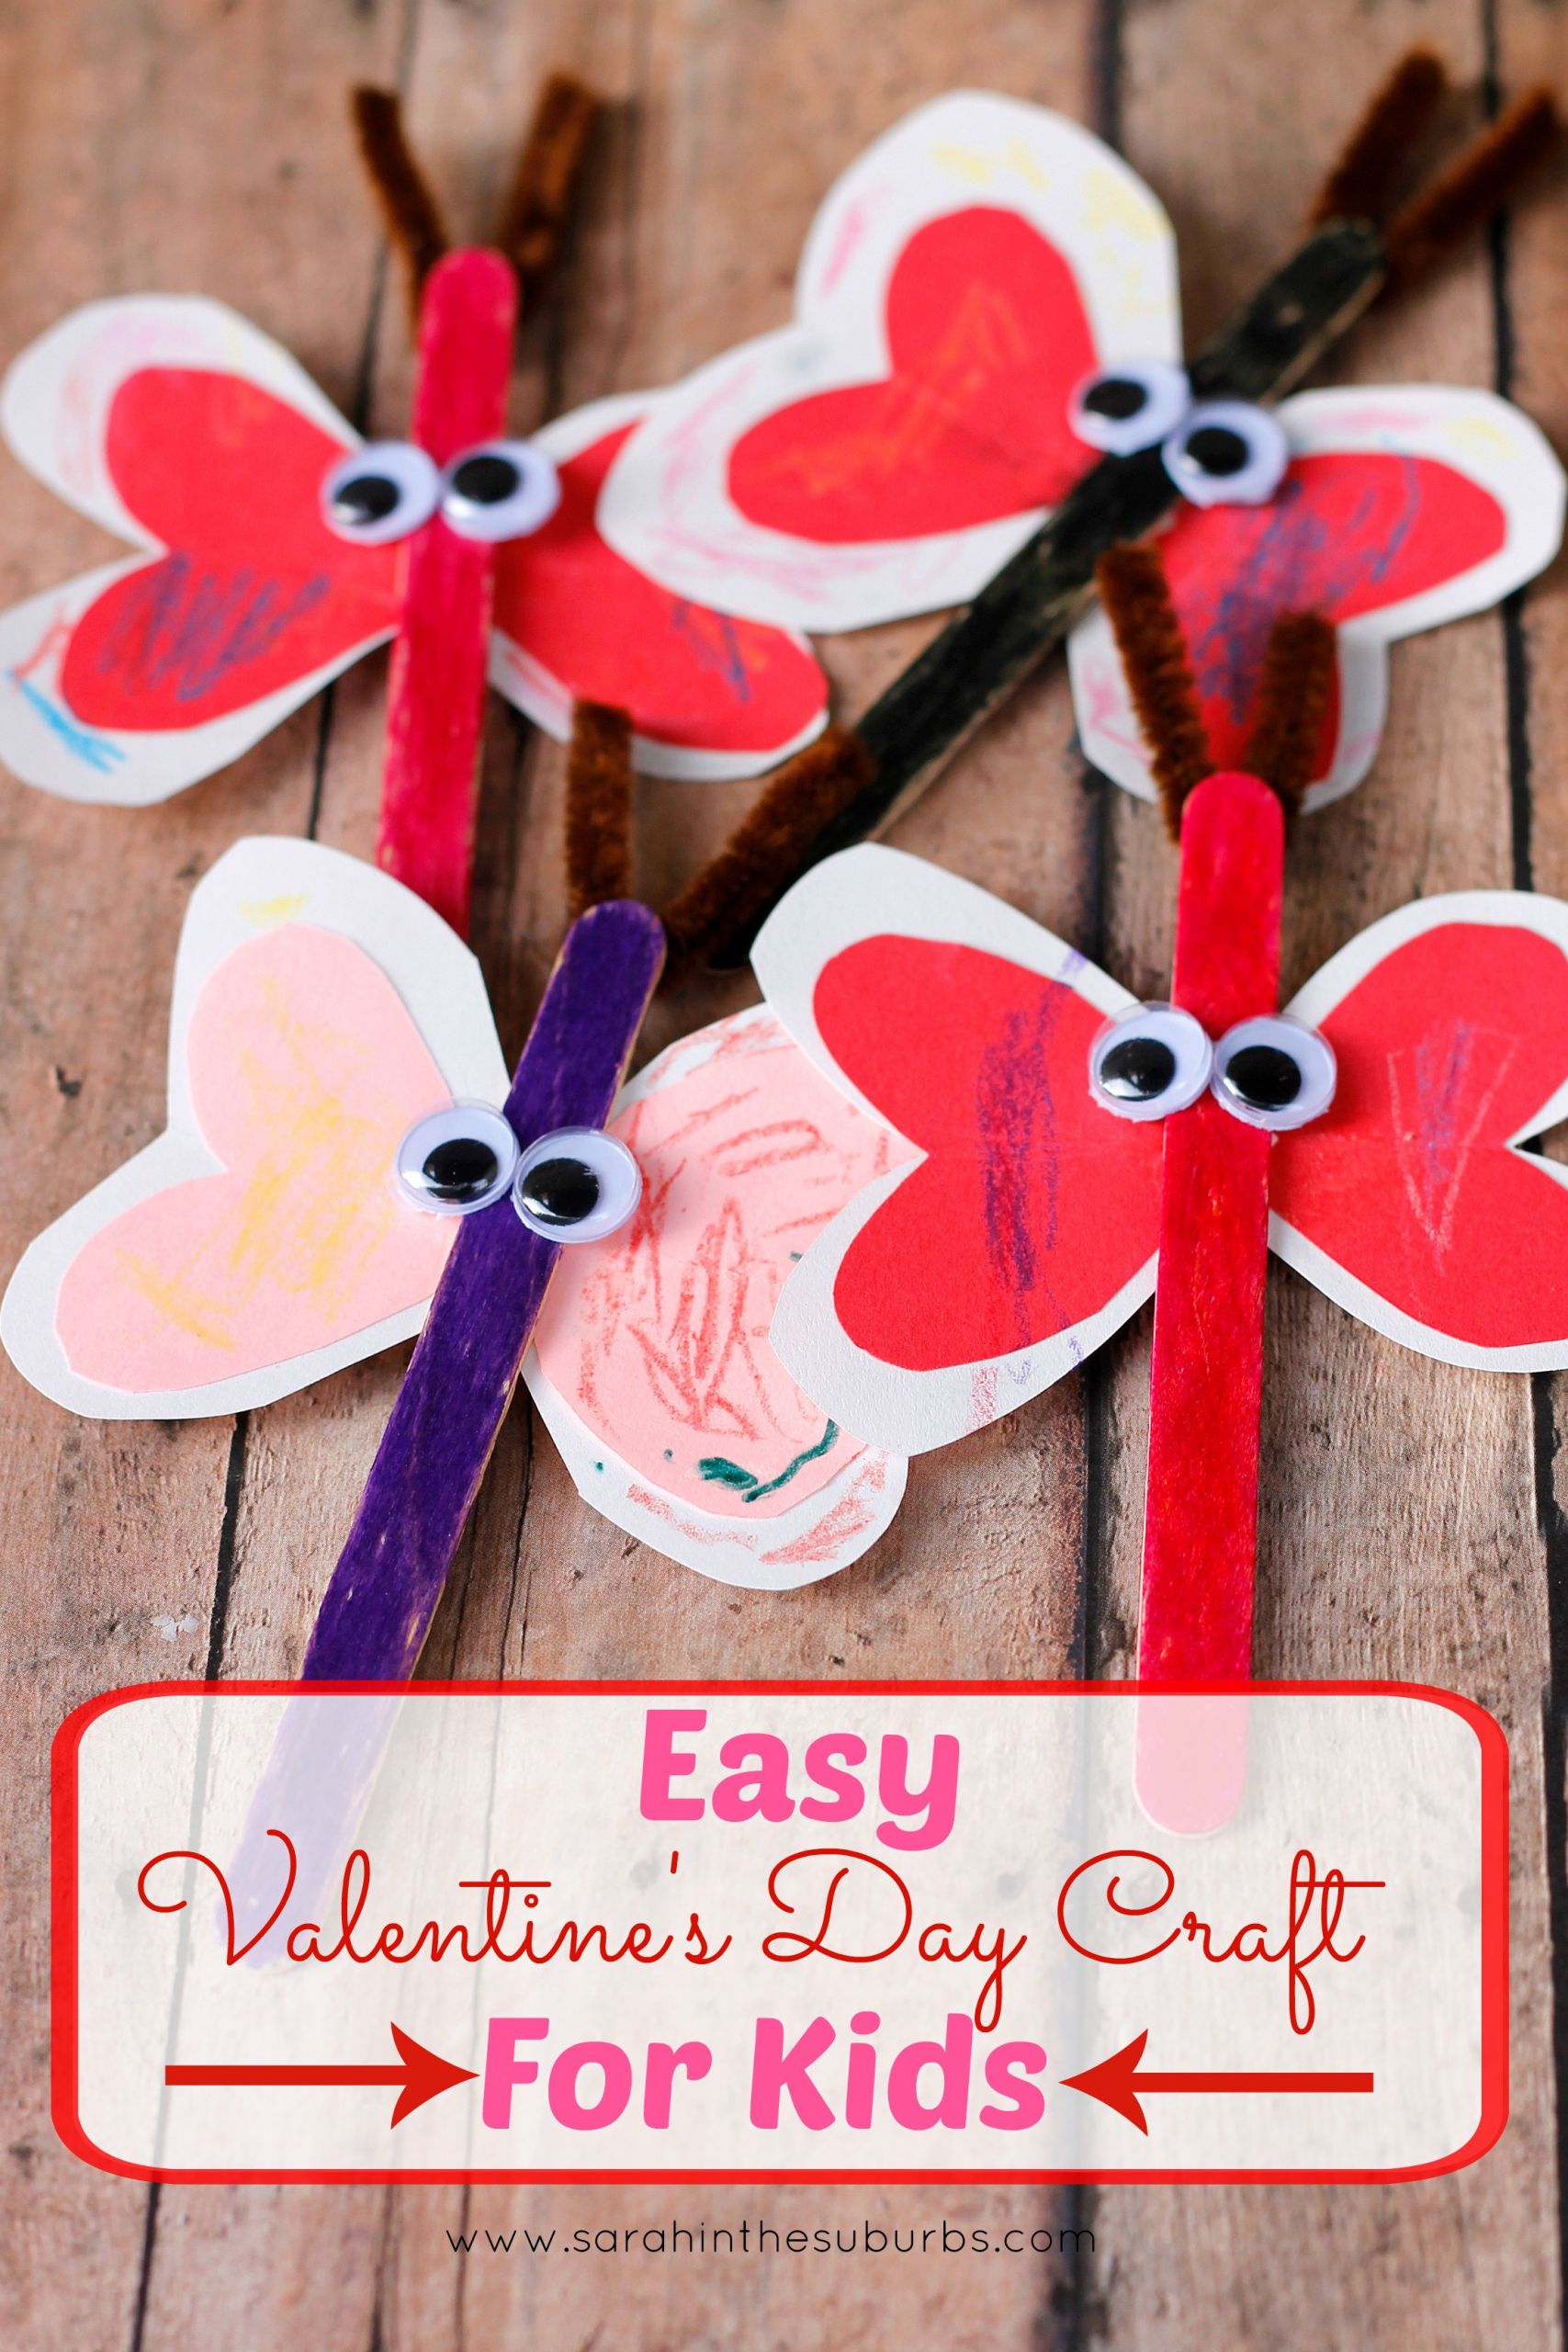 Valentines Day Toddler Craft
 Love Bug Valentine s Day Craft for Kids Sarah in the Suburbs